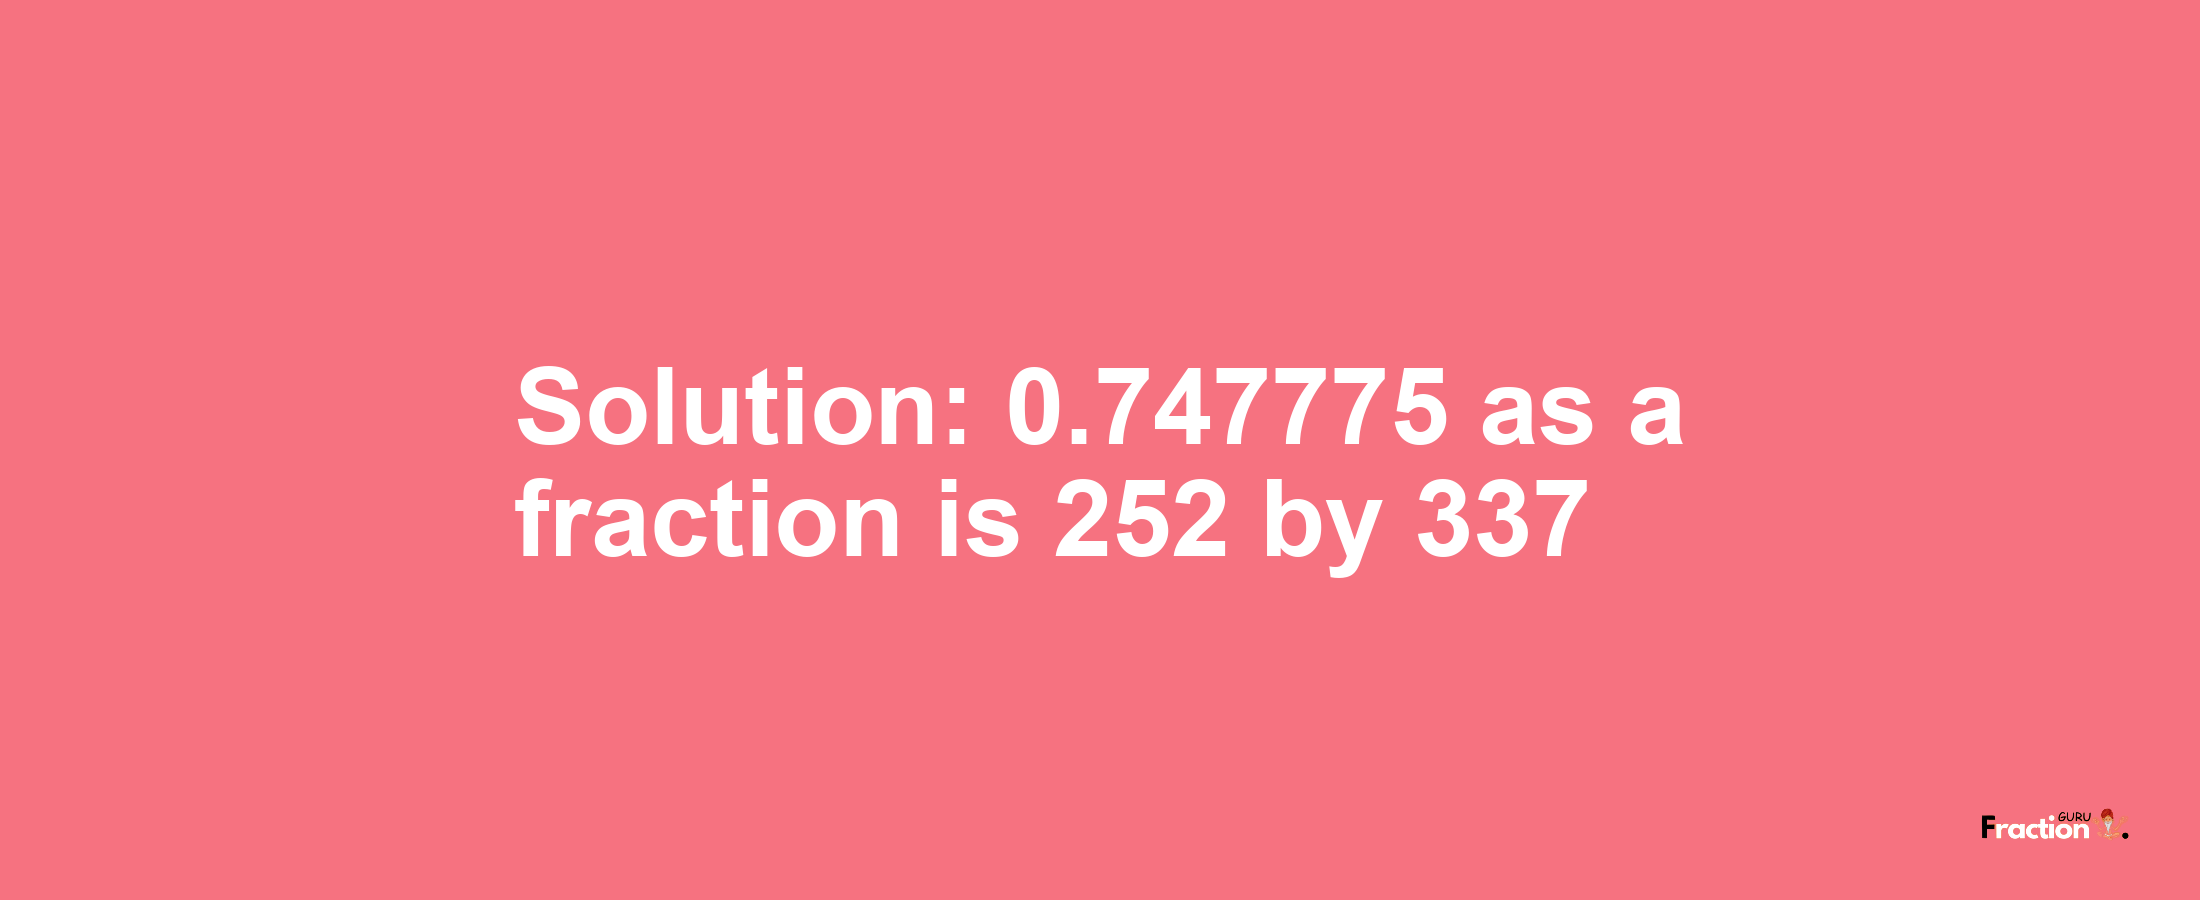 Solution:0.747775 as a fraction is 252/337